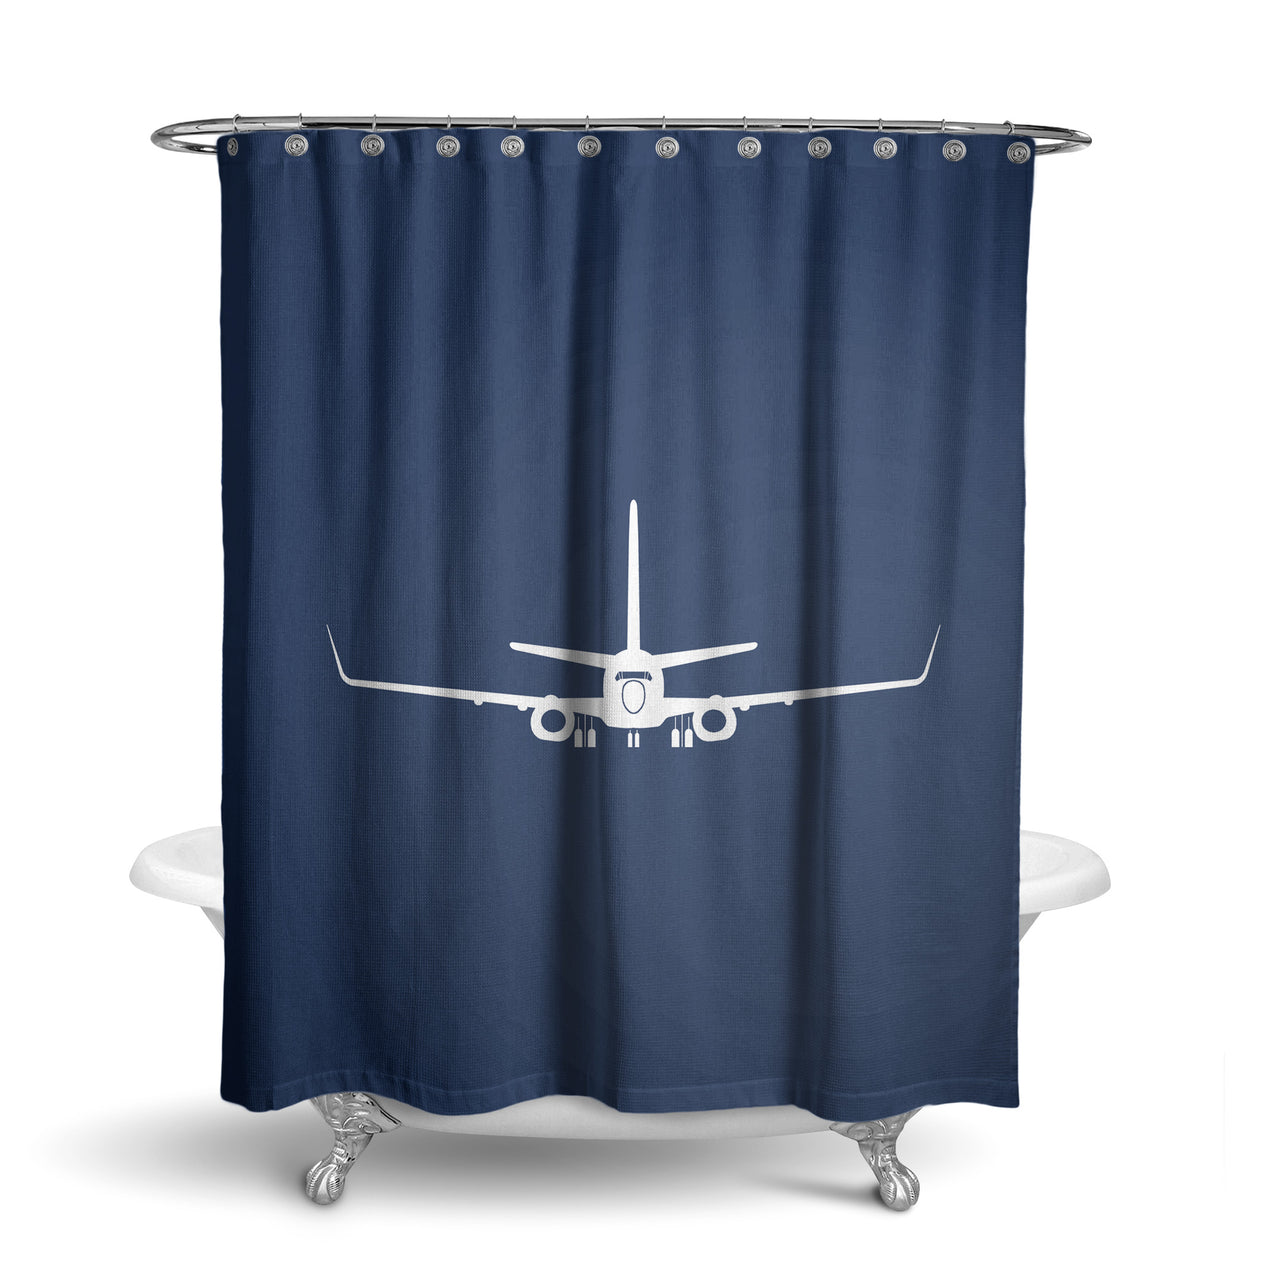 Boeing 737-800NG Silhouette Designed Shower Curtains